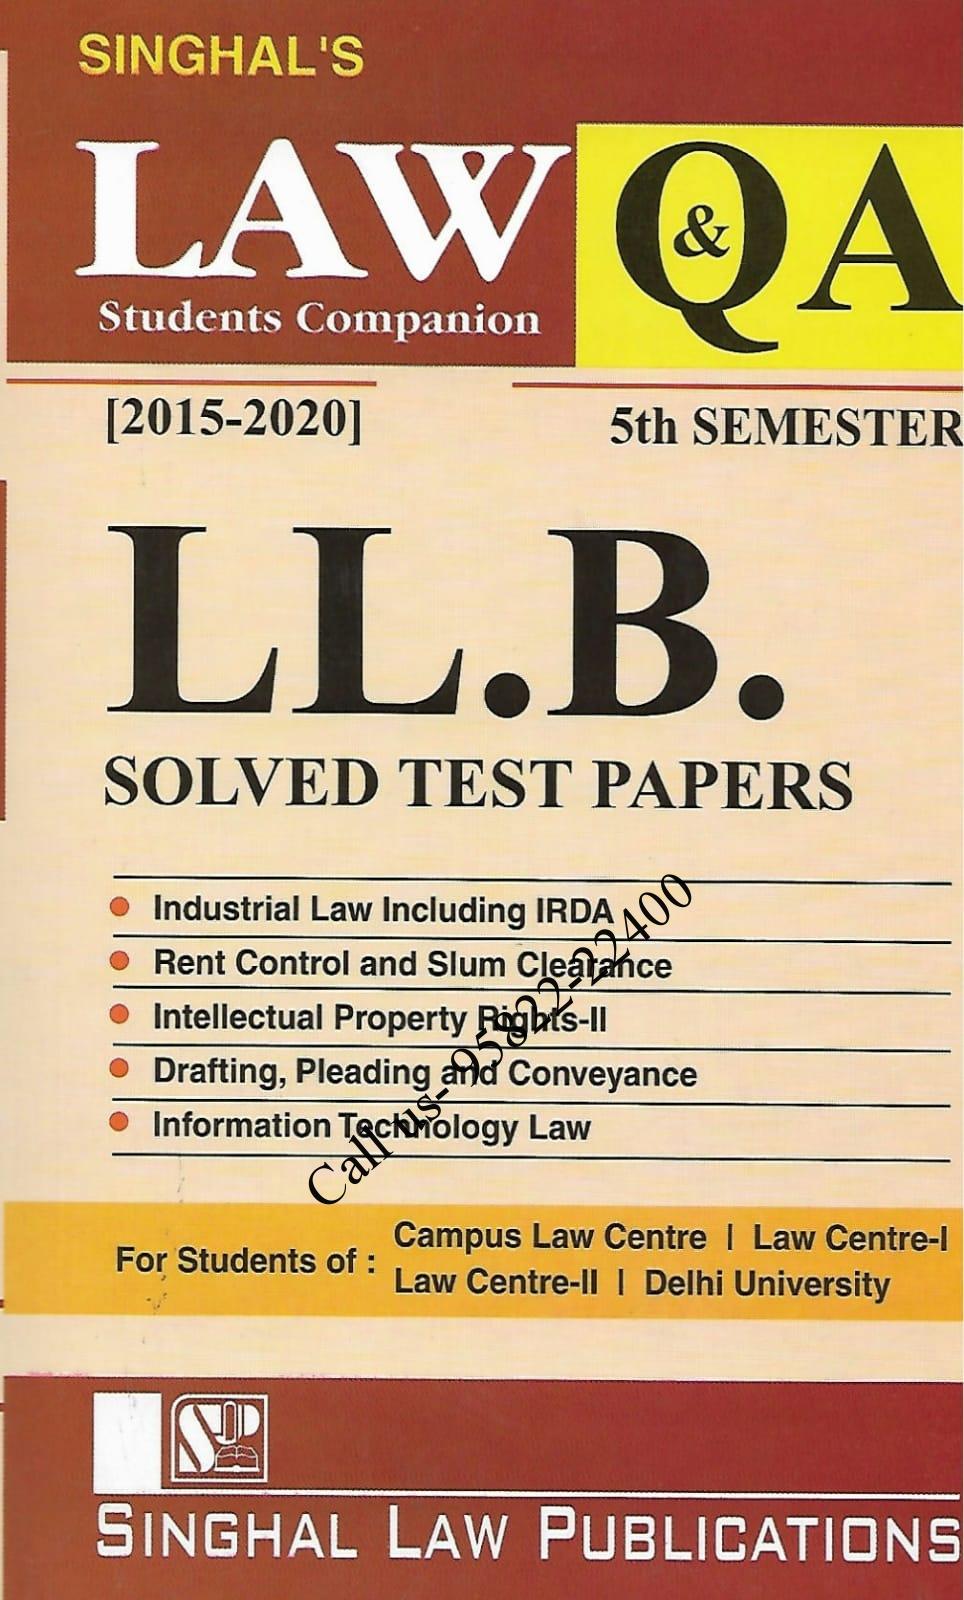 Singhal's DU LLB Previous Year Solved Test Papers (Q&A) for 5th Semester (2022) book cover page